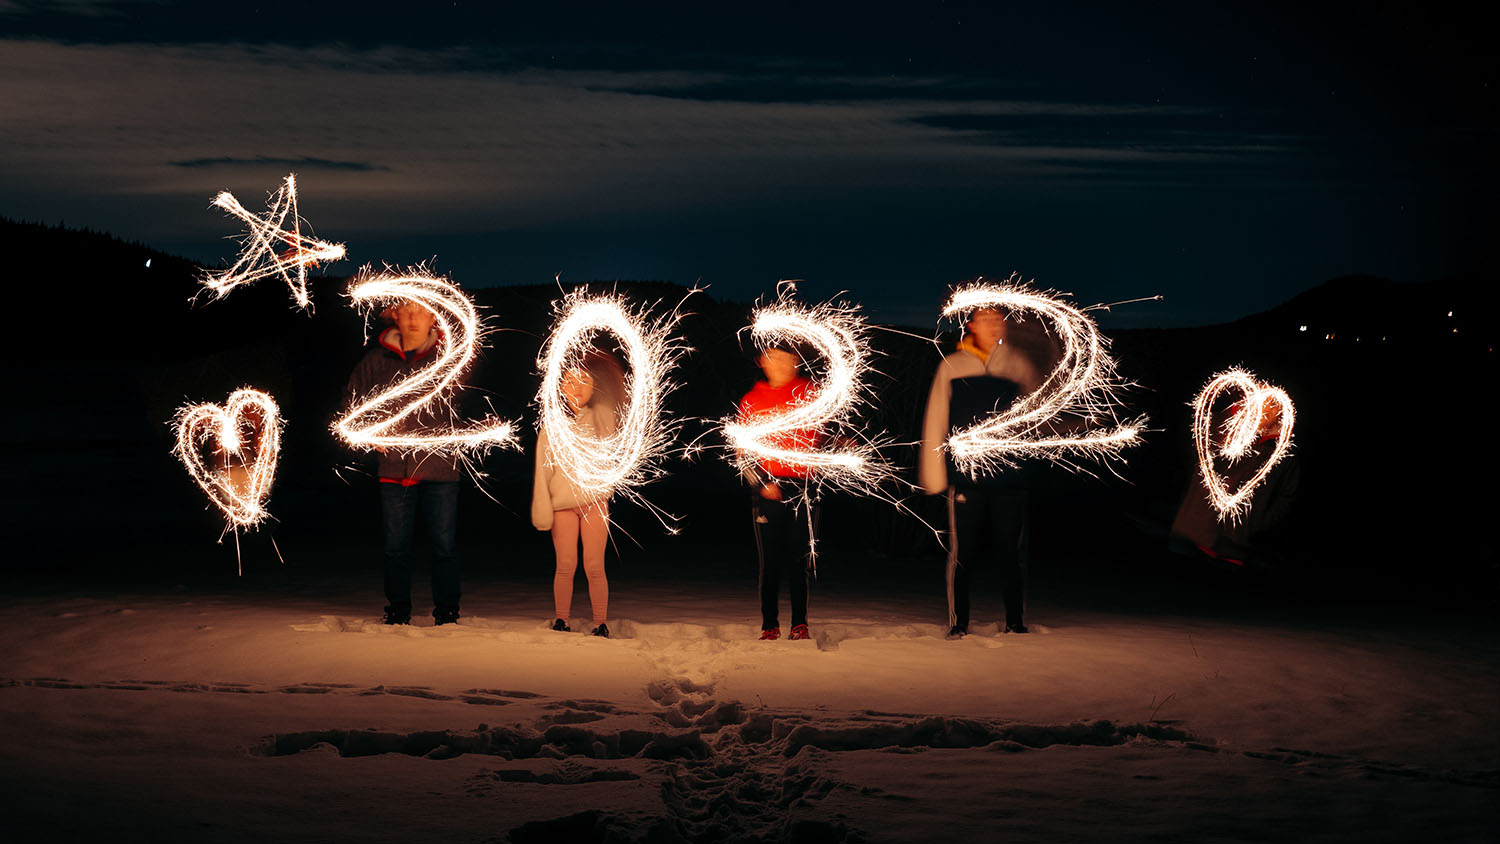 A lightpainting of the numbers 2022 created with sparklers by people standing on a beach.